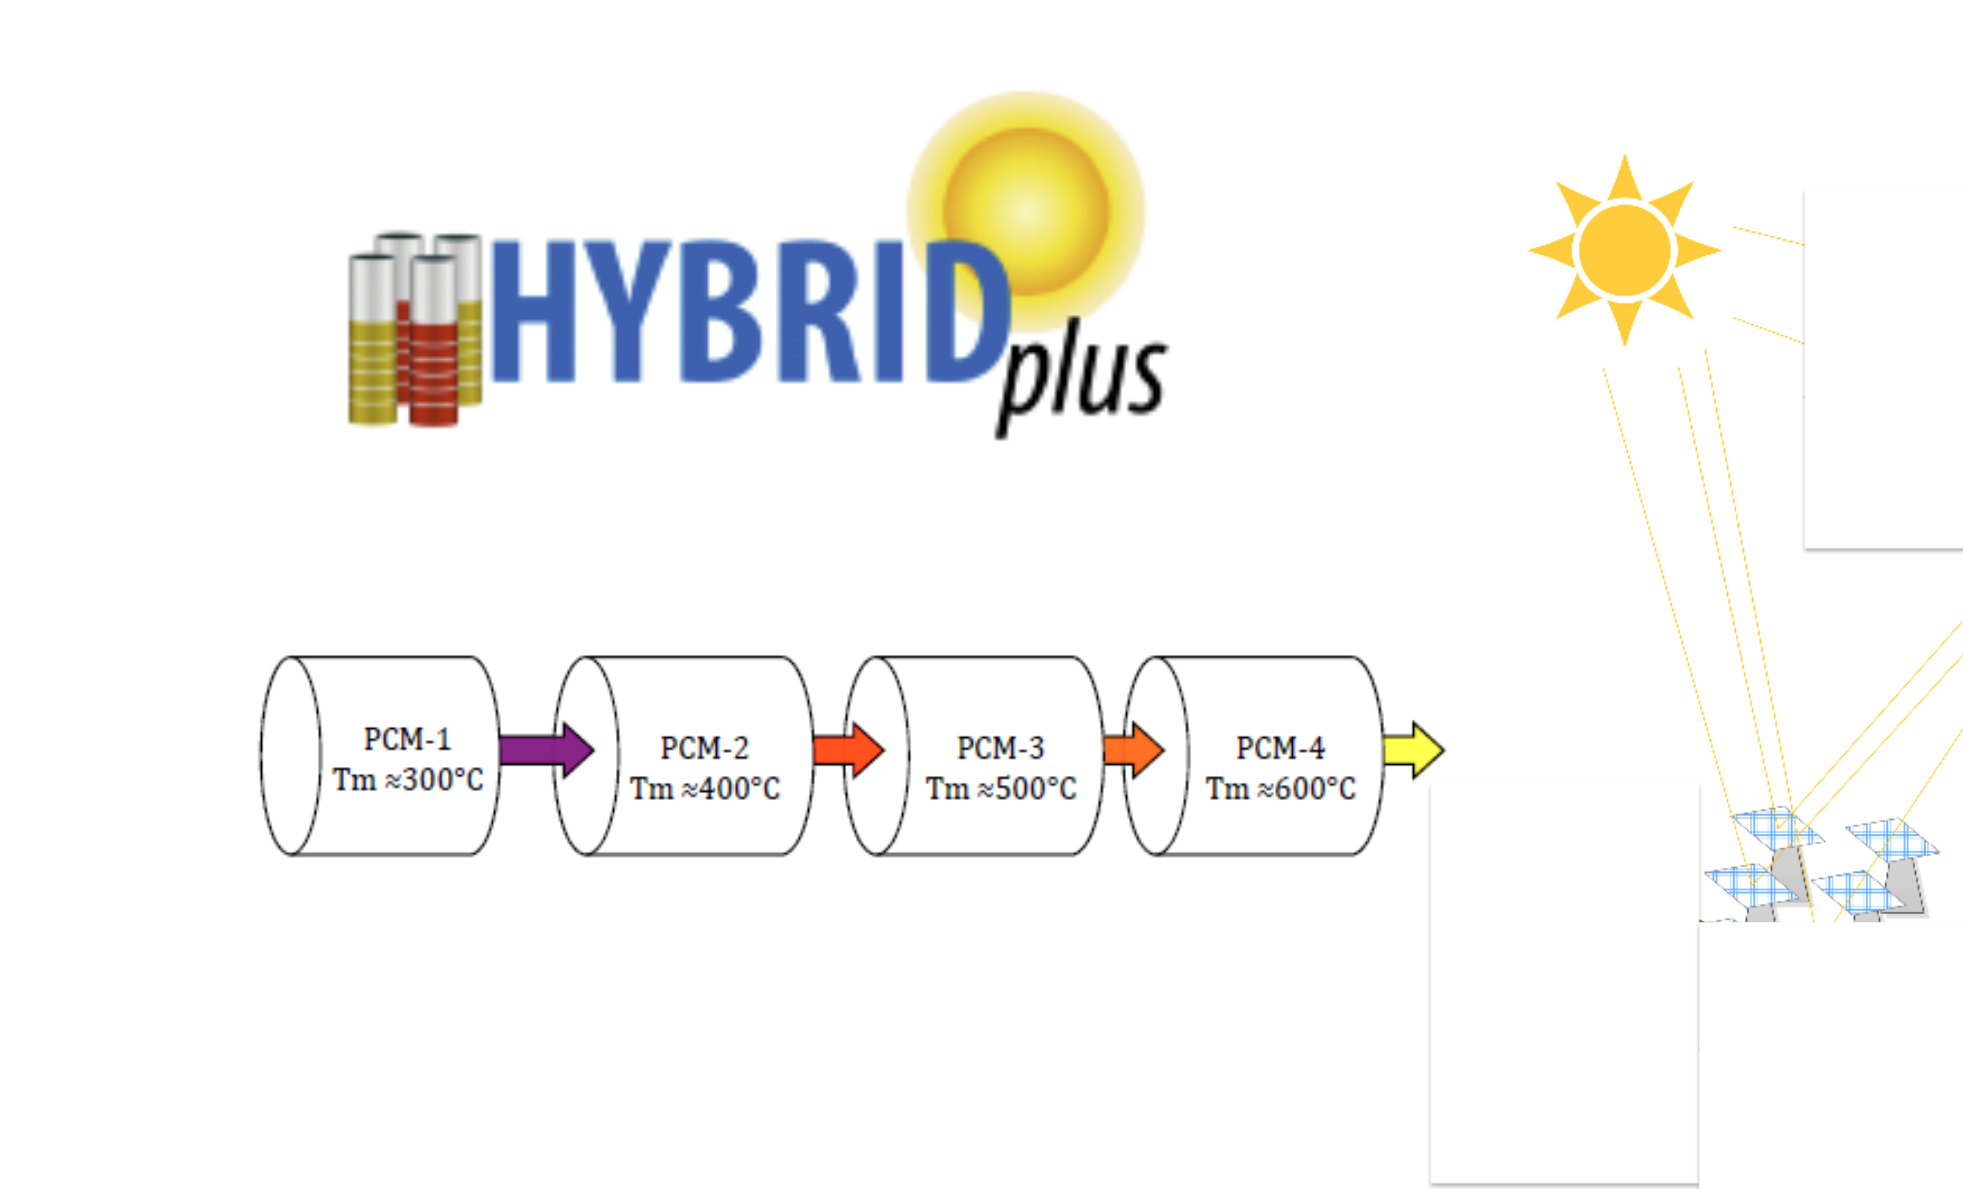 HYBRIDplus four PCMs from 300°C to 600°C